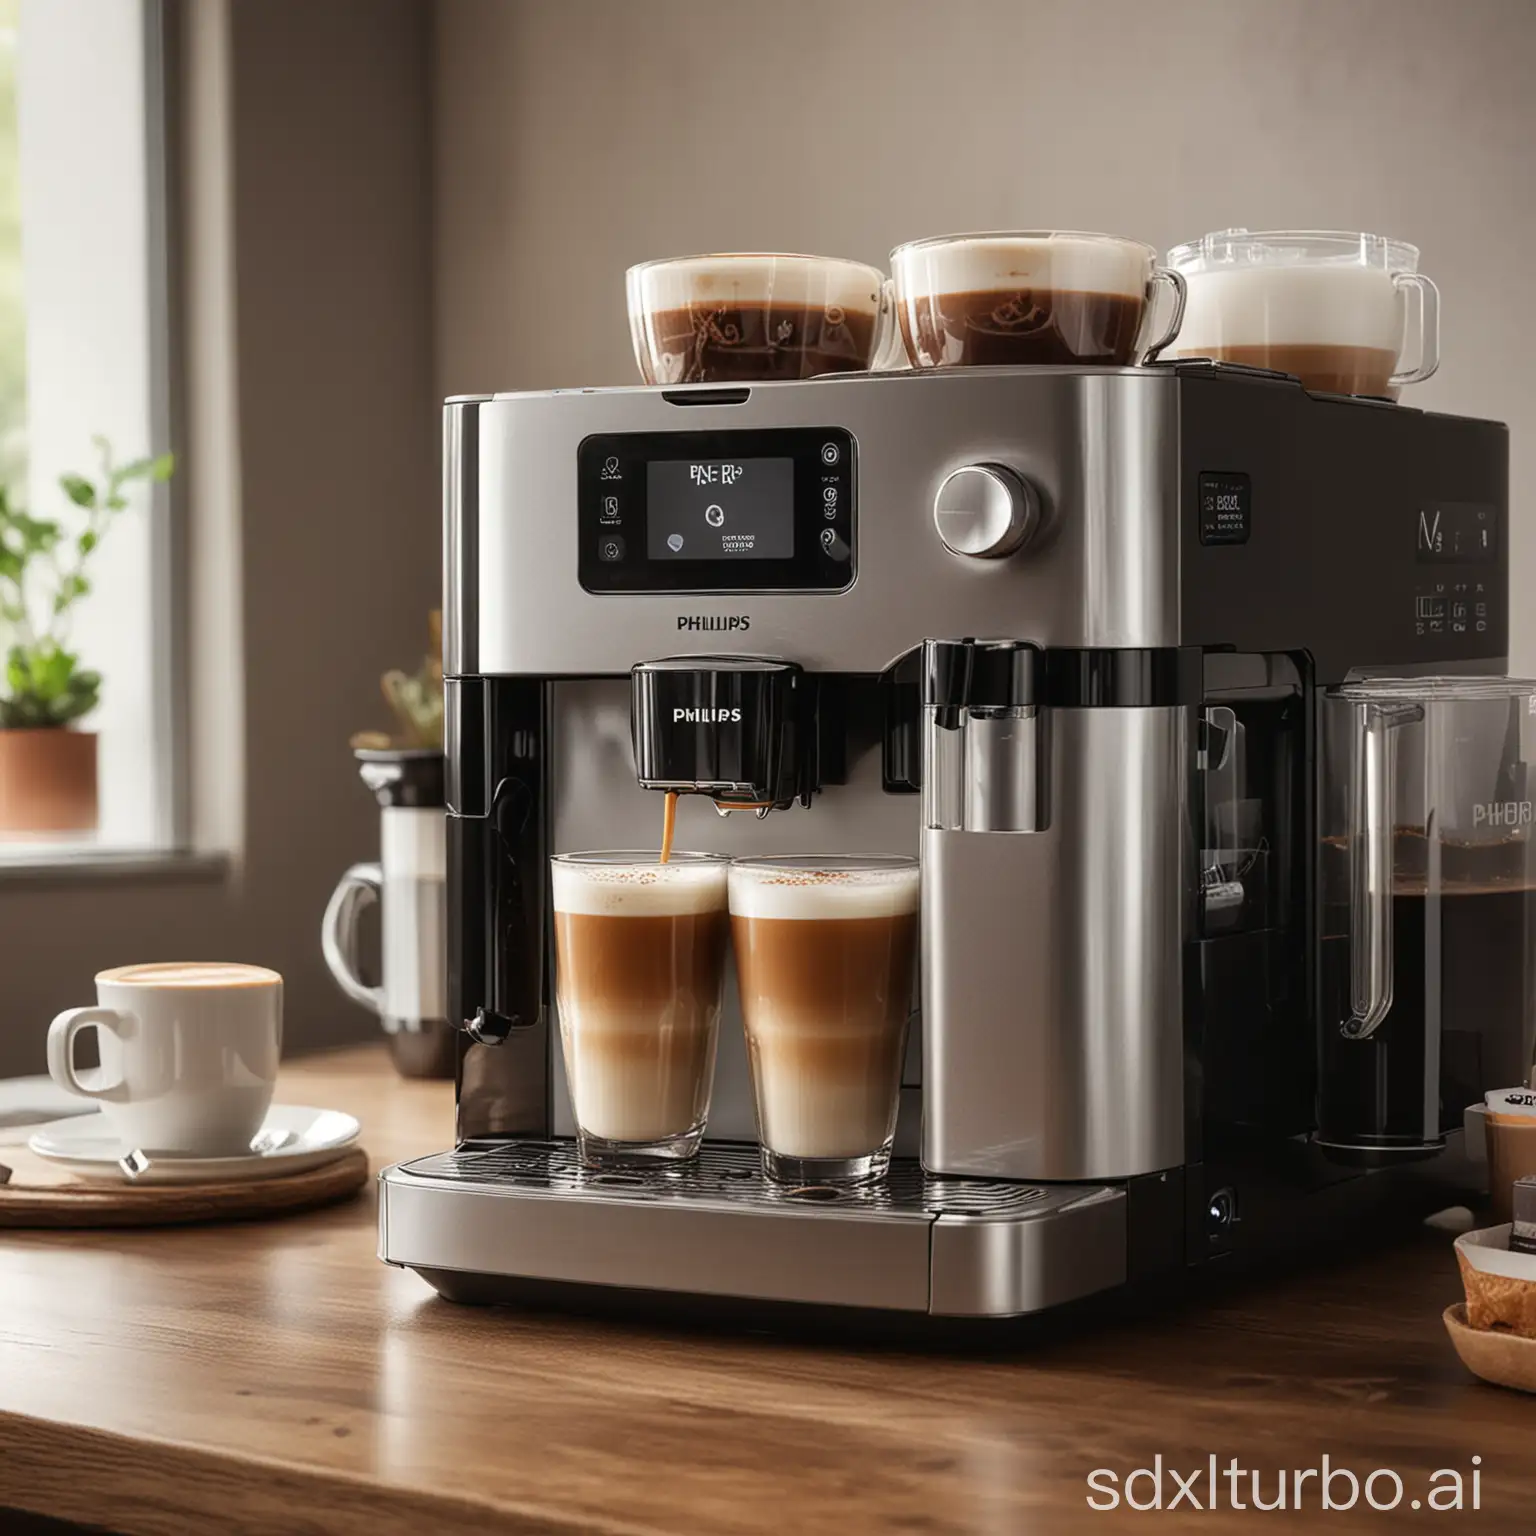 Life style drinking coffee from philips full automated coffee machine